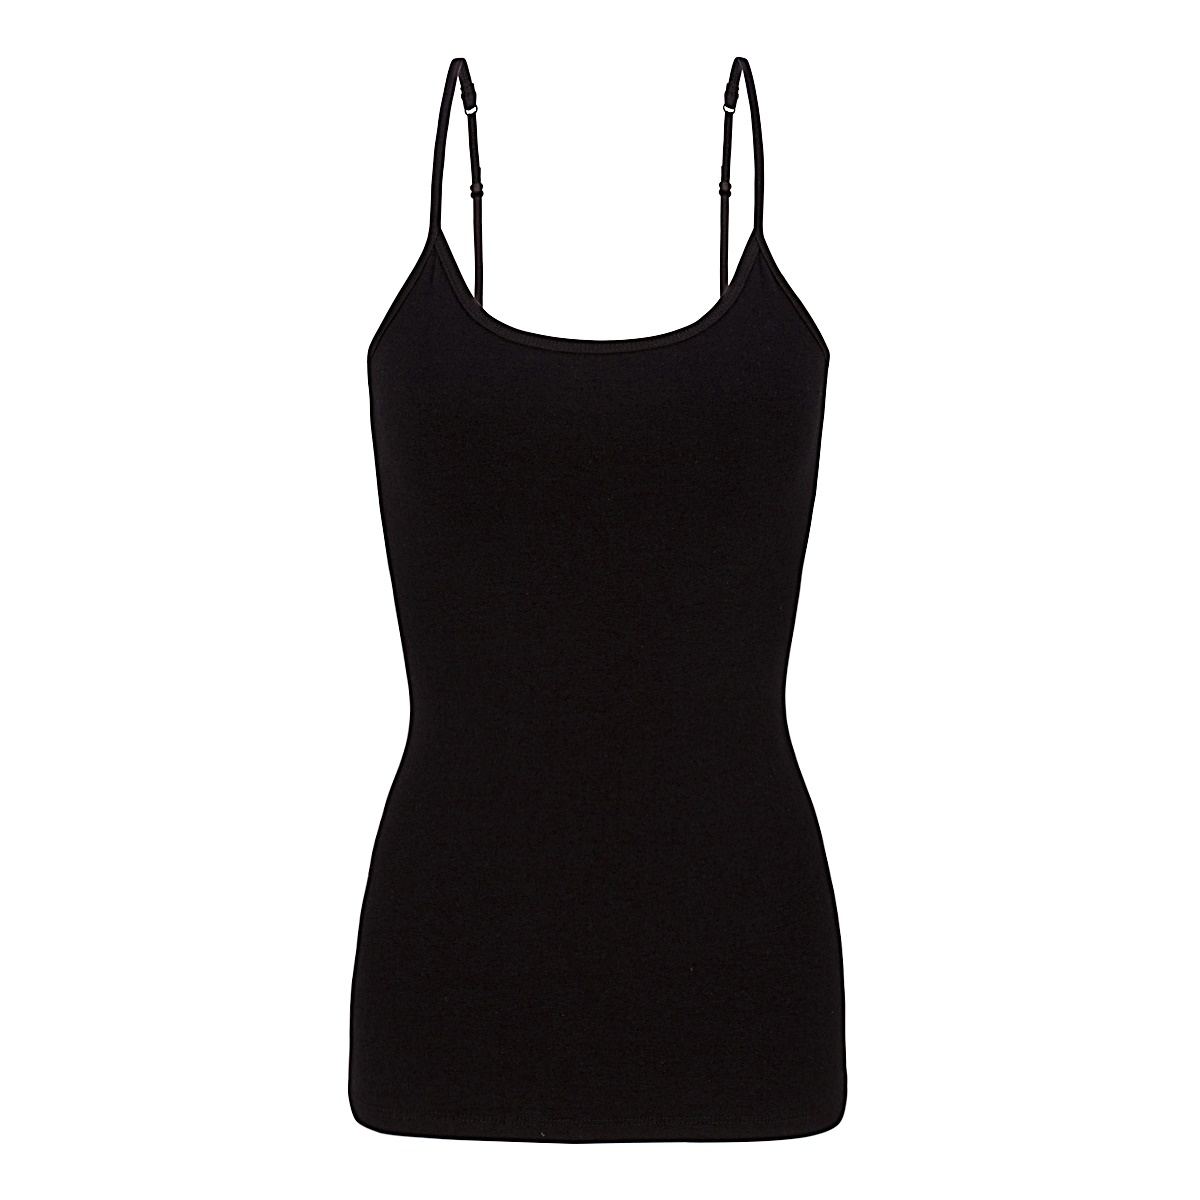 BASIC CAMISOLE WITH ADJUSTABLE SPAGHETTI STRAP TANK TOP (STYLE